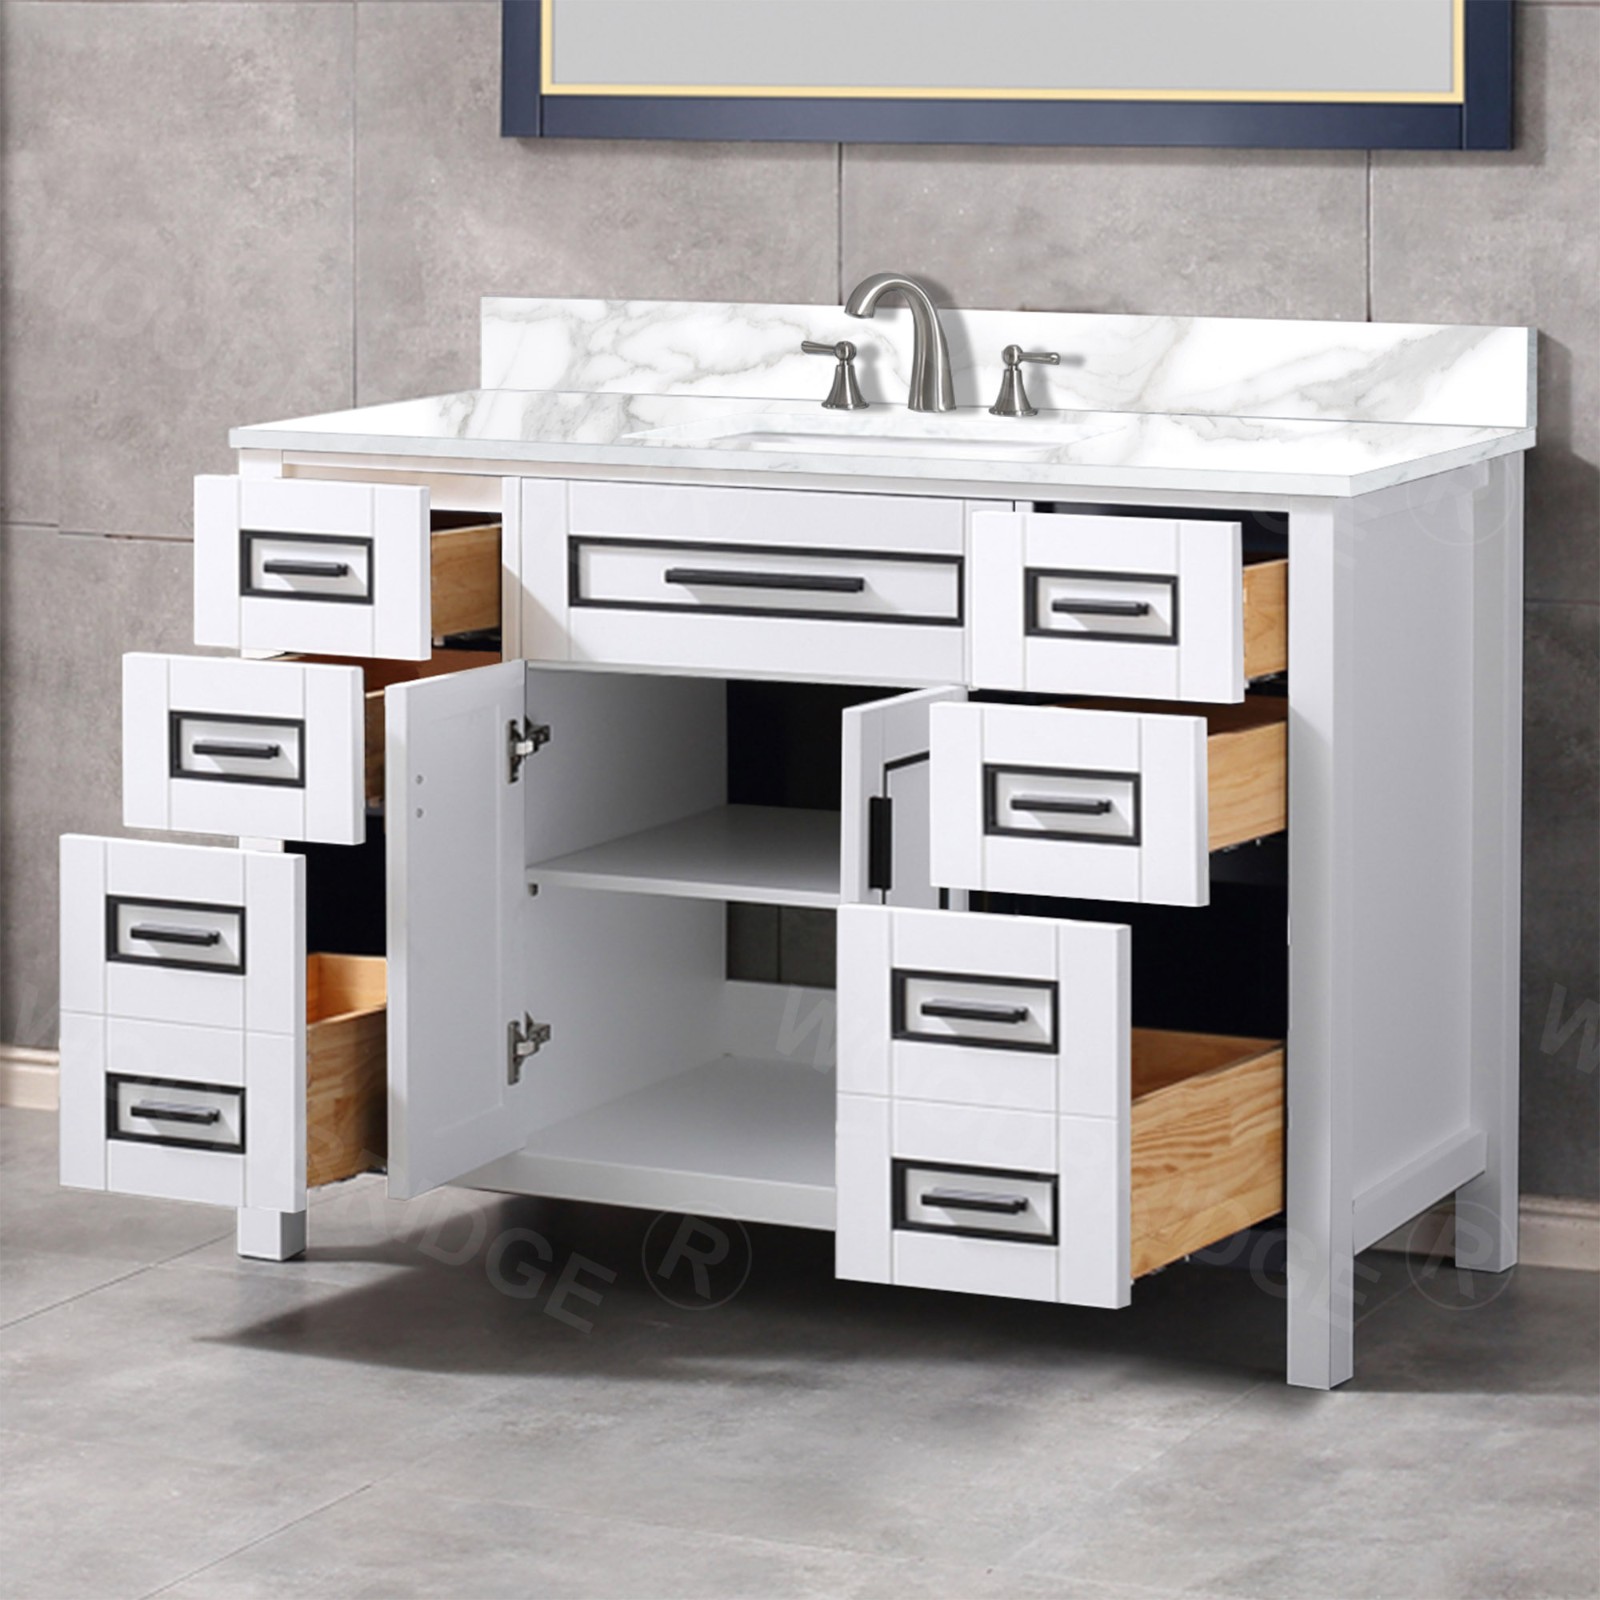  WOODBRIDGE Milan  49” Floor Mounted Single Basin Vanity Set with Solid Wood Cabinet in White and Engineered stone composite Vanity Top in Fish Belly White with Pre-installed Undermount Rectangle Bathroom Sink and Pre-Drilled 3-Hole for 8-inch Widespread F_4675